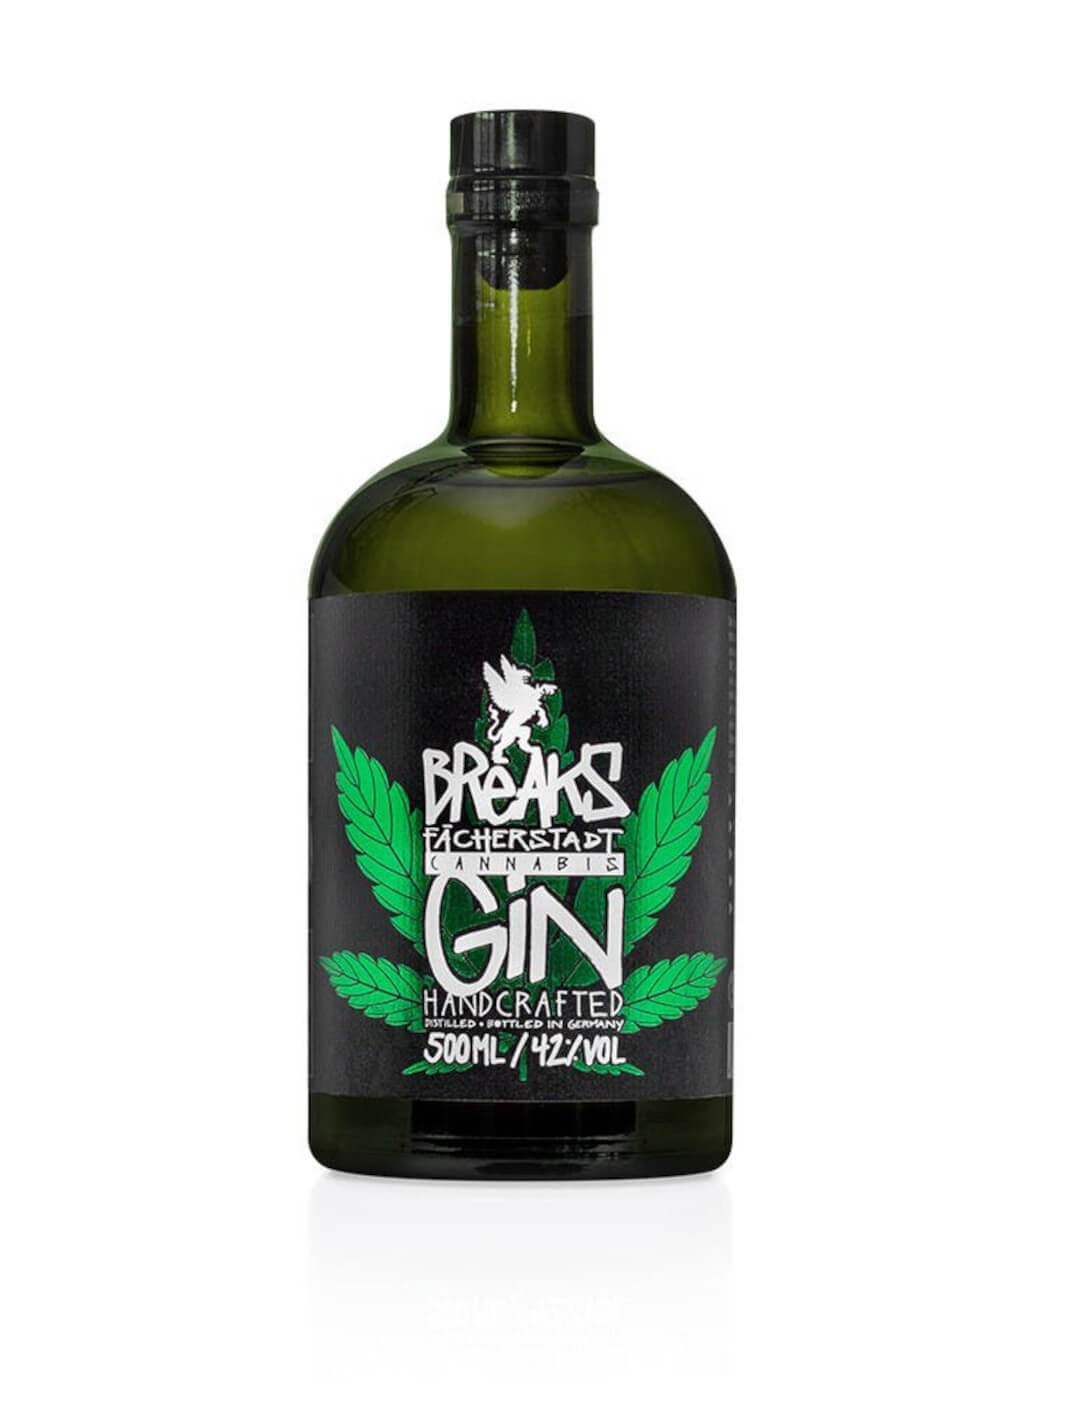 Breaks handcrafted Cannabis Gin